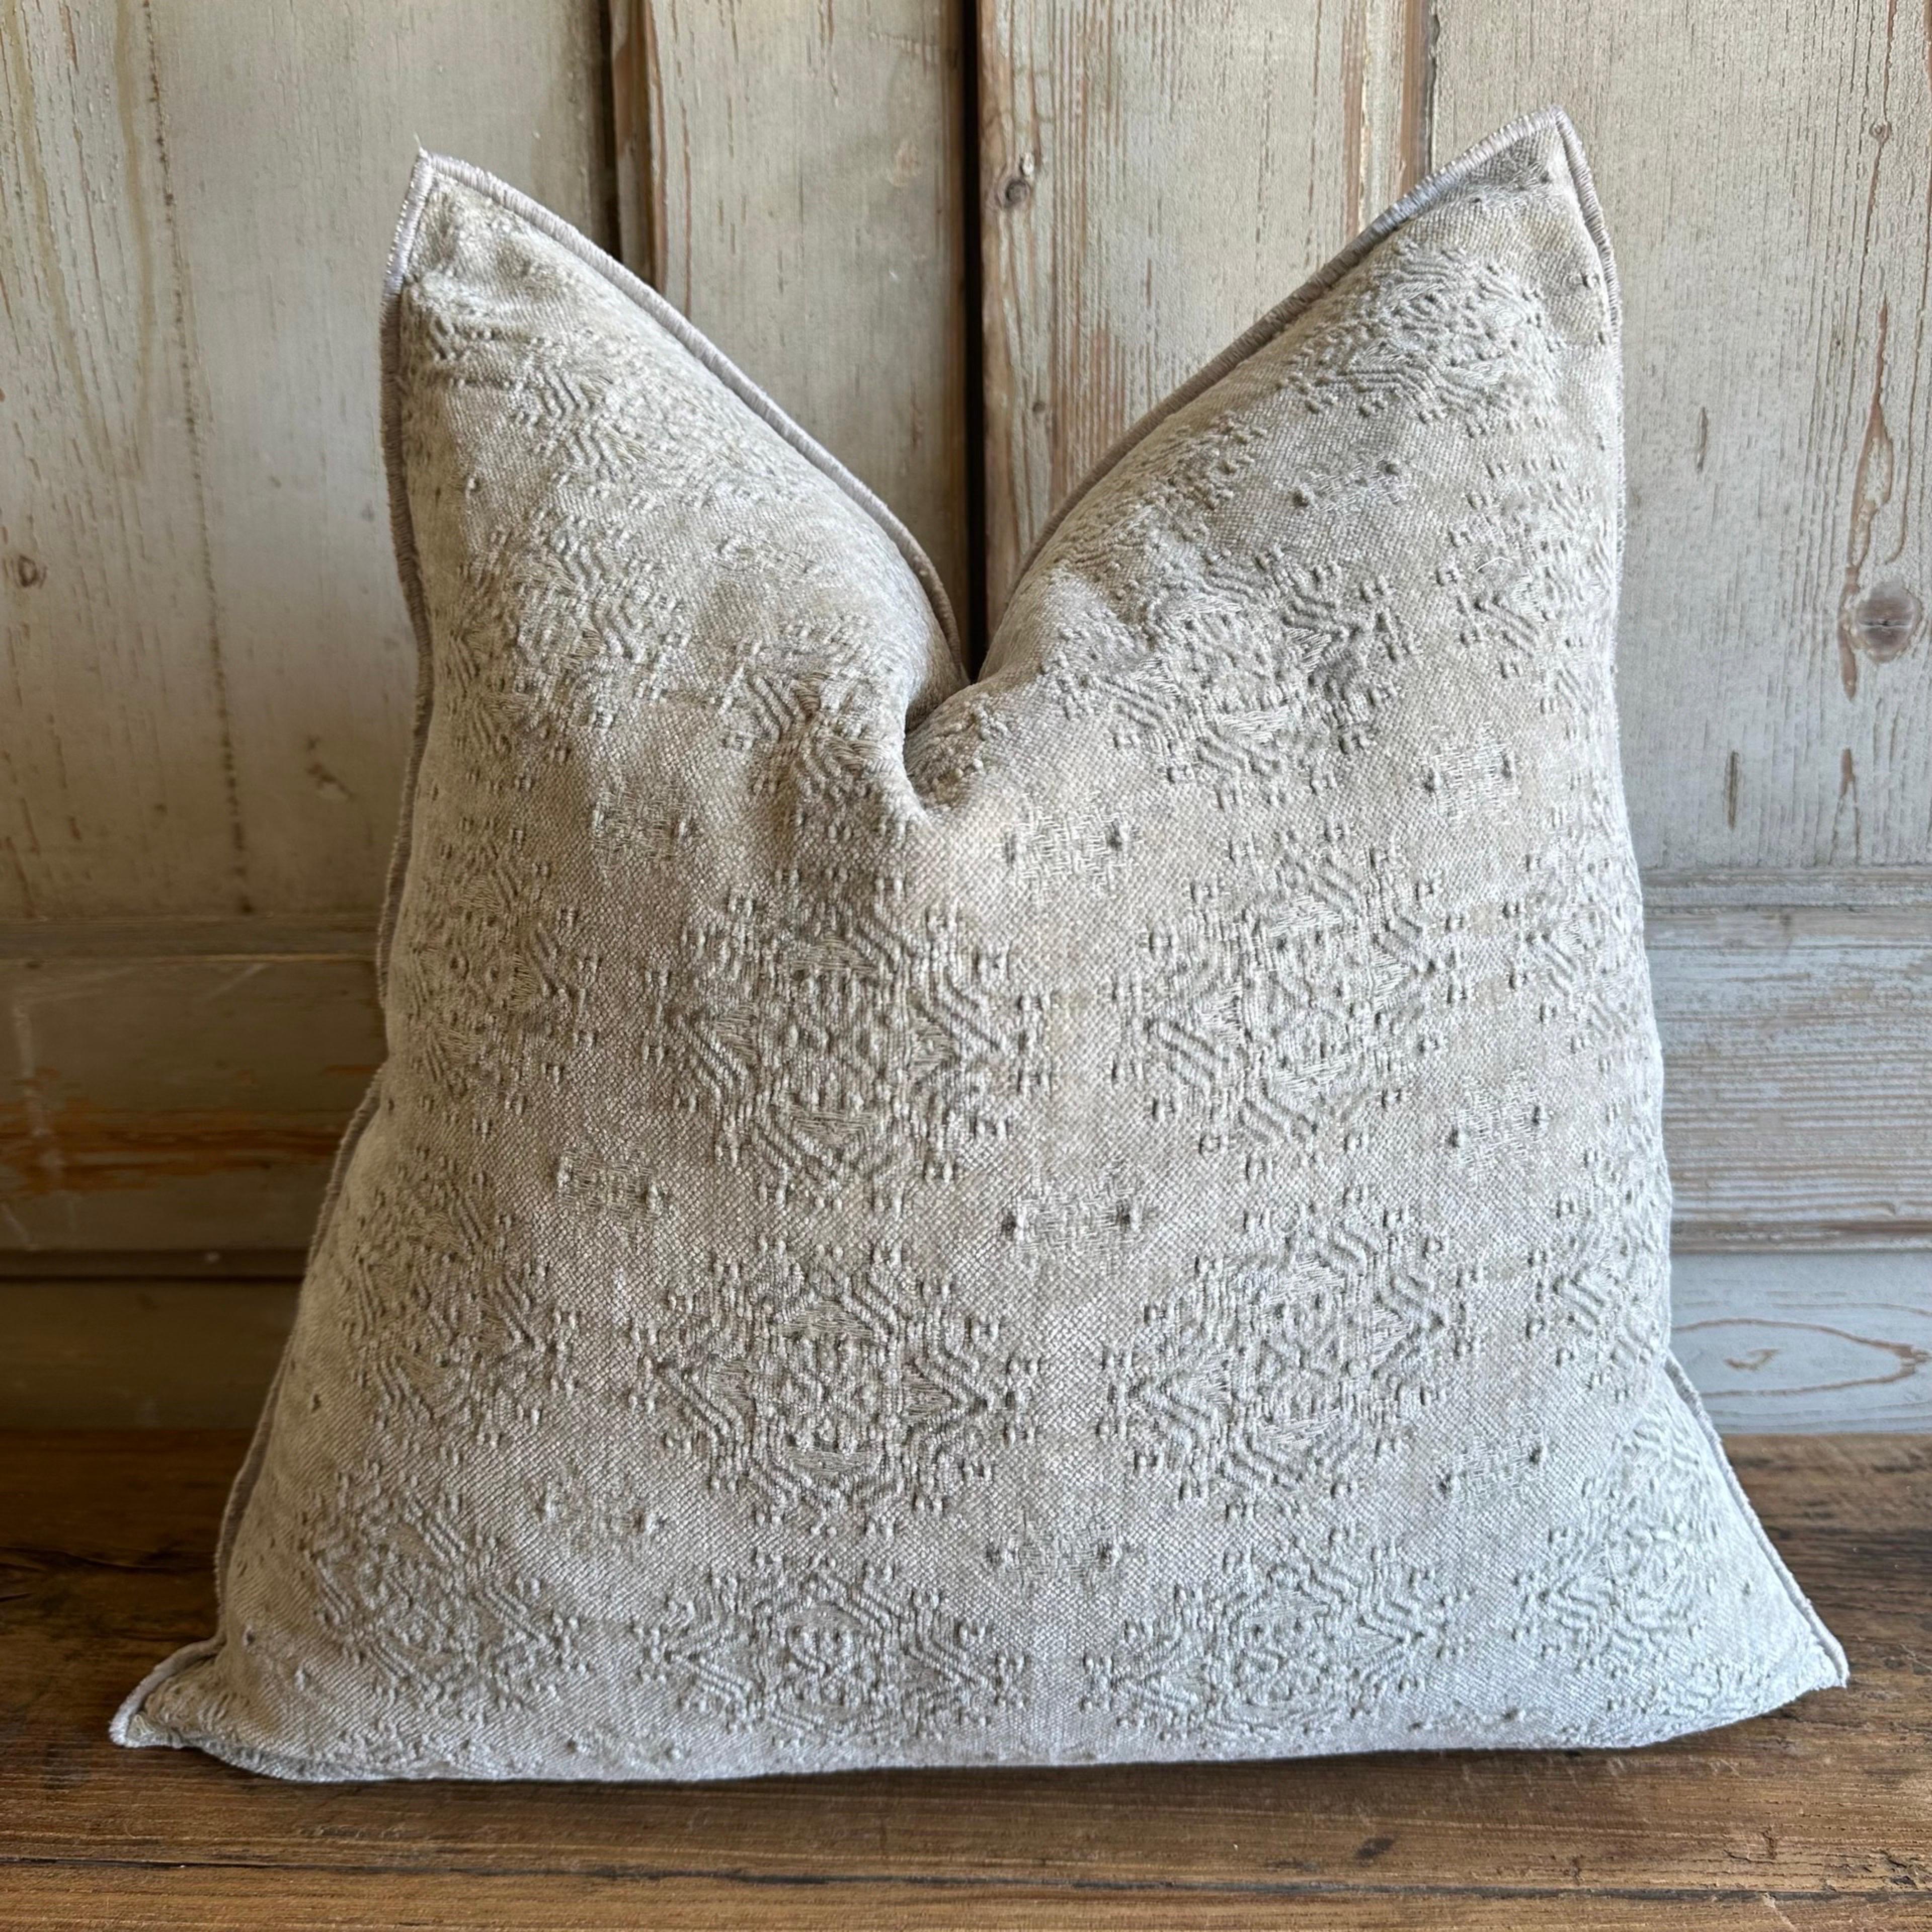 Custom chenille, with linen blend accent pillow. 
Color: Ciment 
Stone washed chenille, with a grey/stone colored nubby textured style pillow with a stitched edge, metal zipper closure. 

Our pillows are constructed with vintage one of a kind